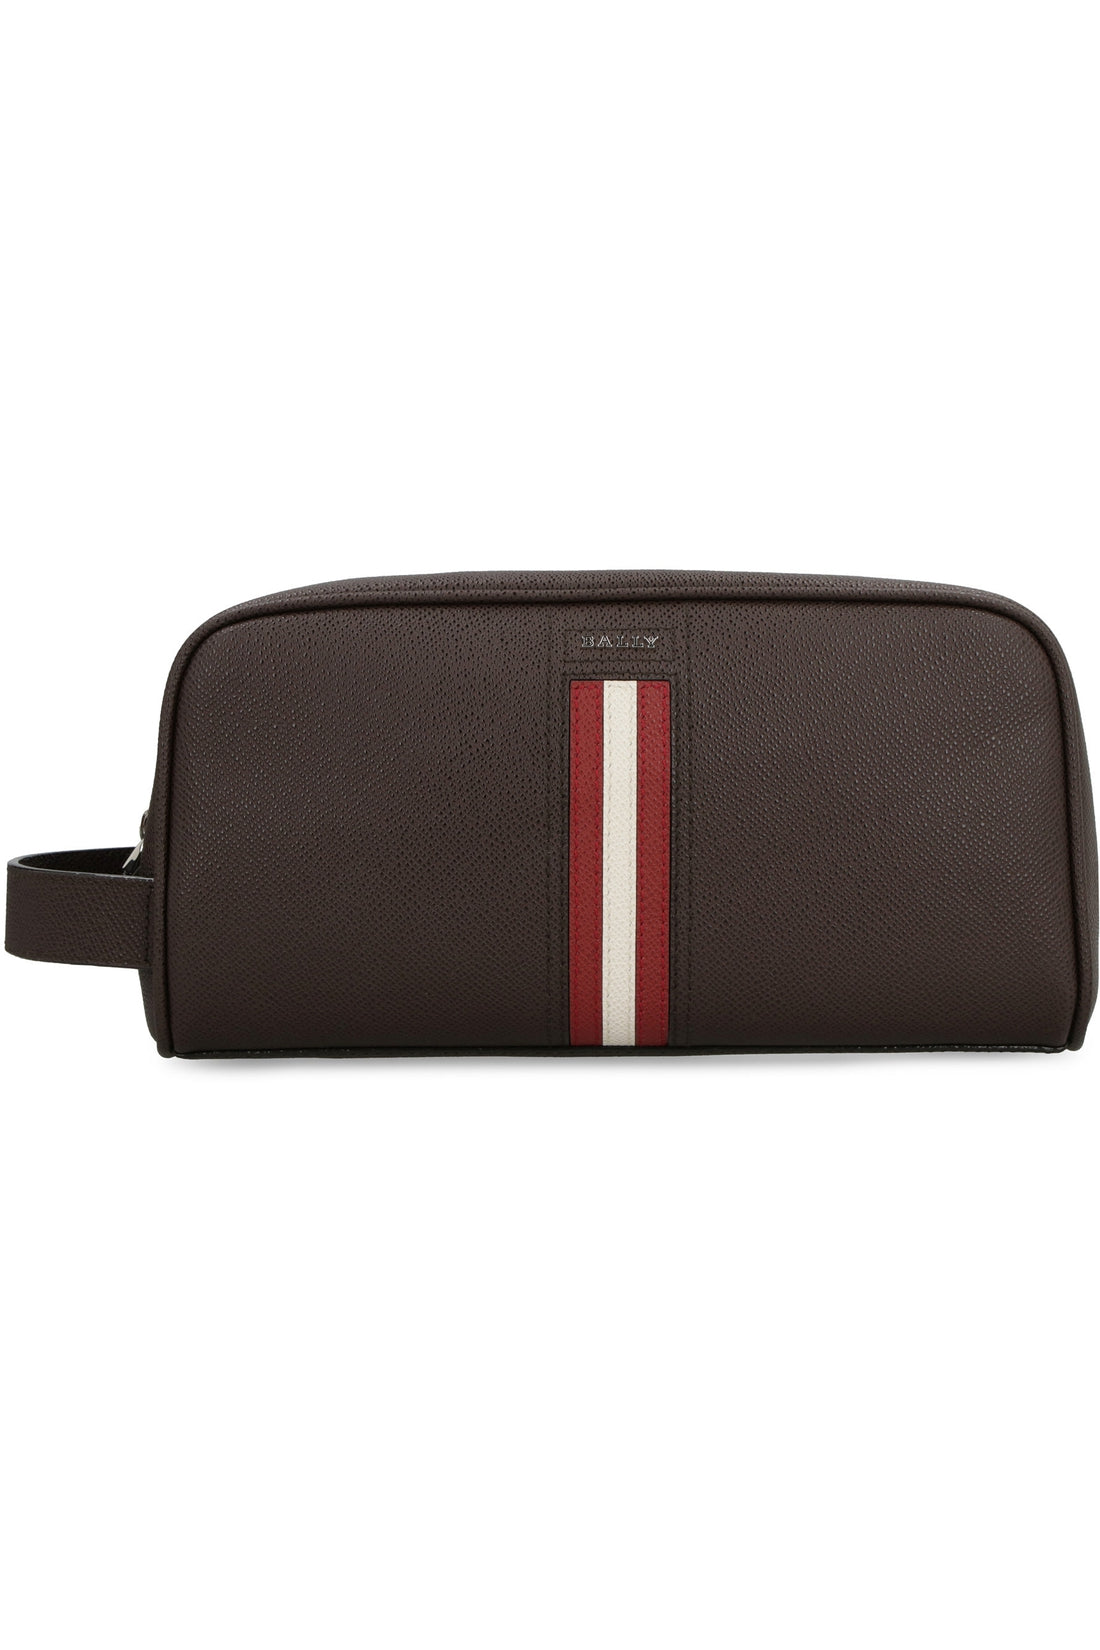 Bally-OUTLET-SALE-Takimo leather beauty case-ARCHIVIST